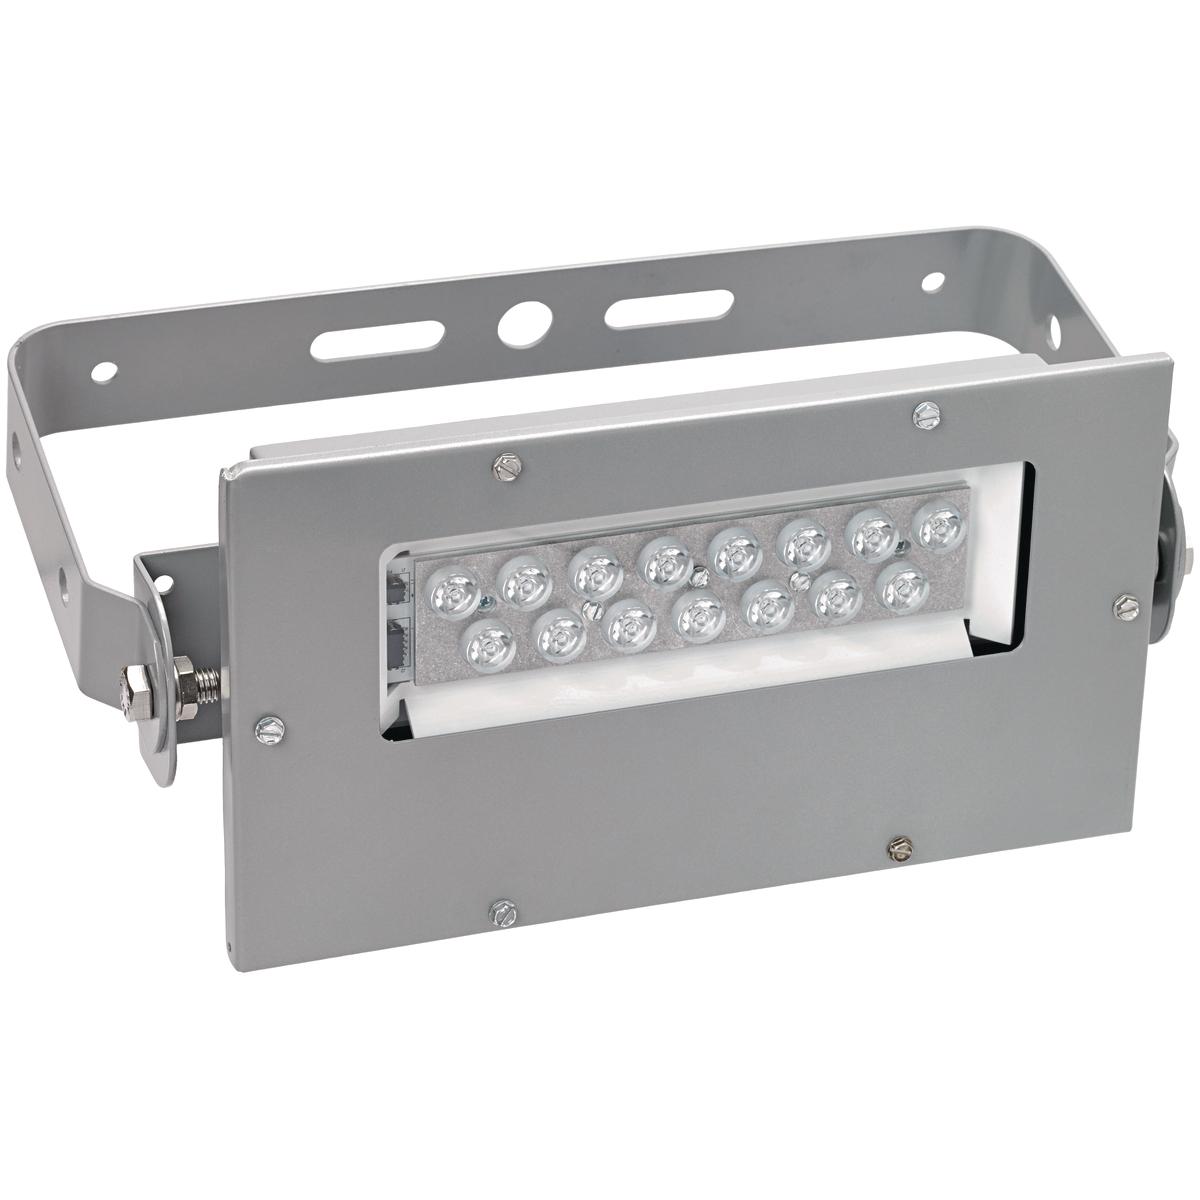 Hubbell KFLC1834 The KFLC Series compact LED floodlights are designed with a copper-free aluminum housing and painted with a powder epoxy finish for superior corrosion resistance in harsh and hazardous environments. Killark LED floodlights provide a crisp white light that